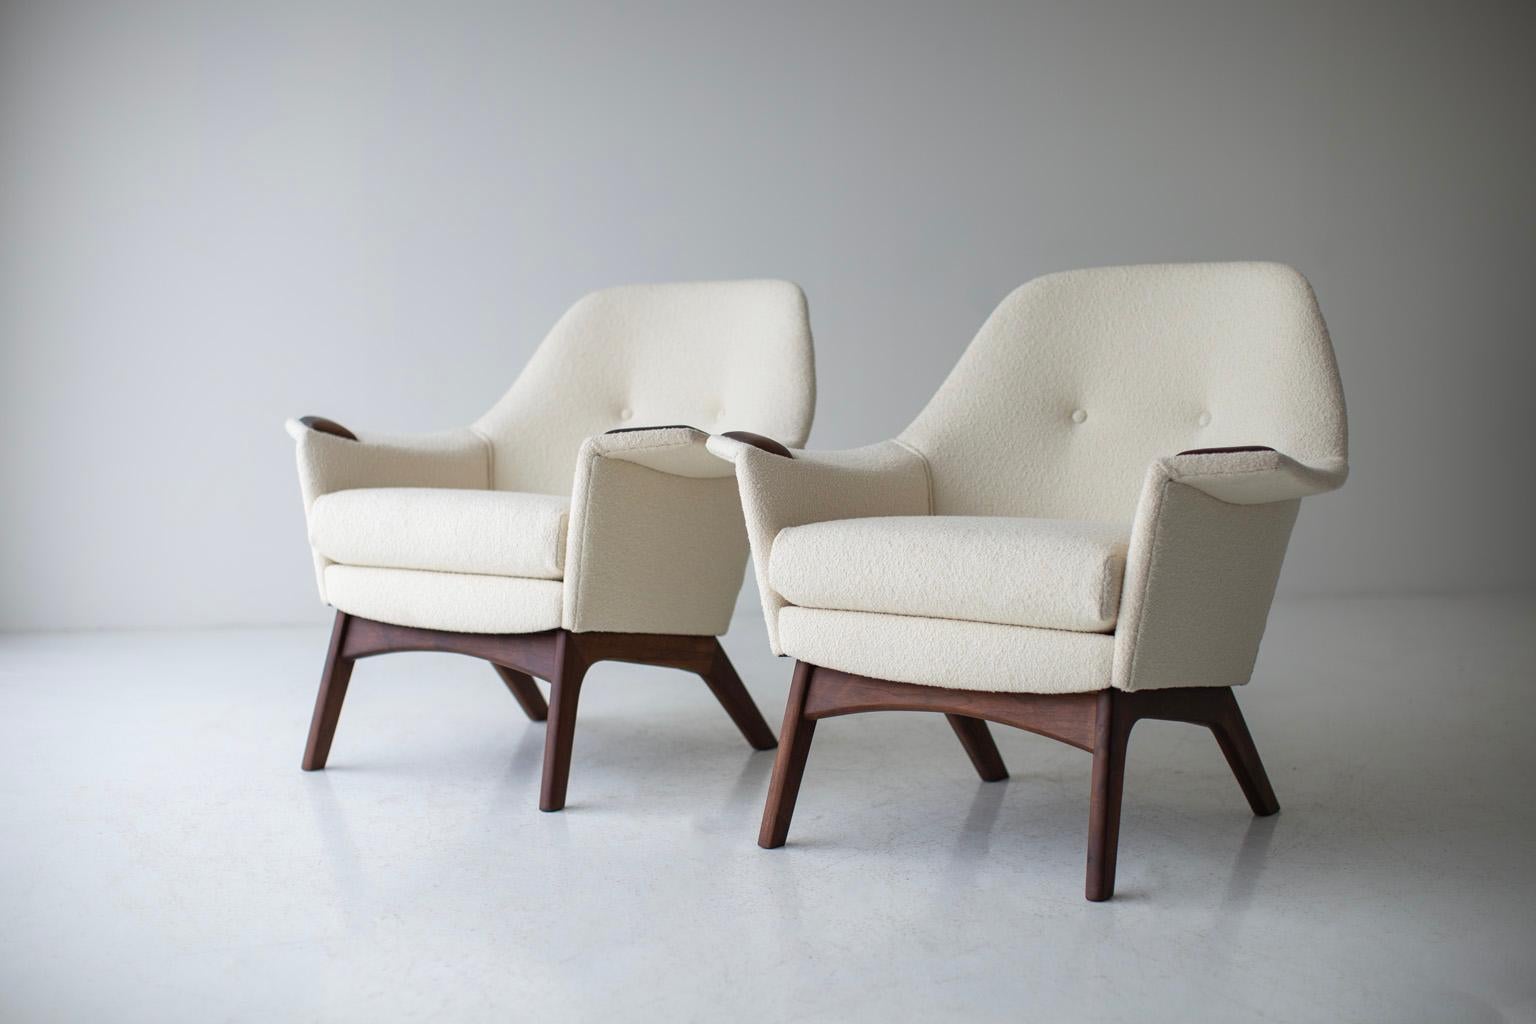 Designer: Adrian Pearsall. 

Manufacturer: Craft Associates Inc. 
Period or model: Mid-Century Modern. 
Specs: Knoll Boucle, Walnut. 

Condition: 

These Swanky Adrian Pearsall lounge chairs for Craft Associates Inc. are in excellent